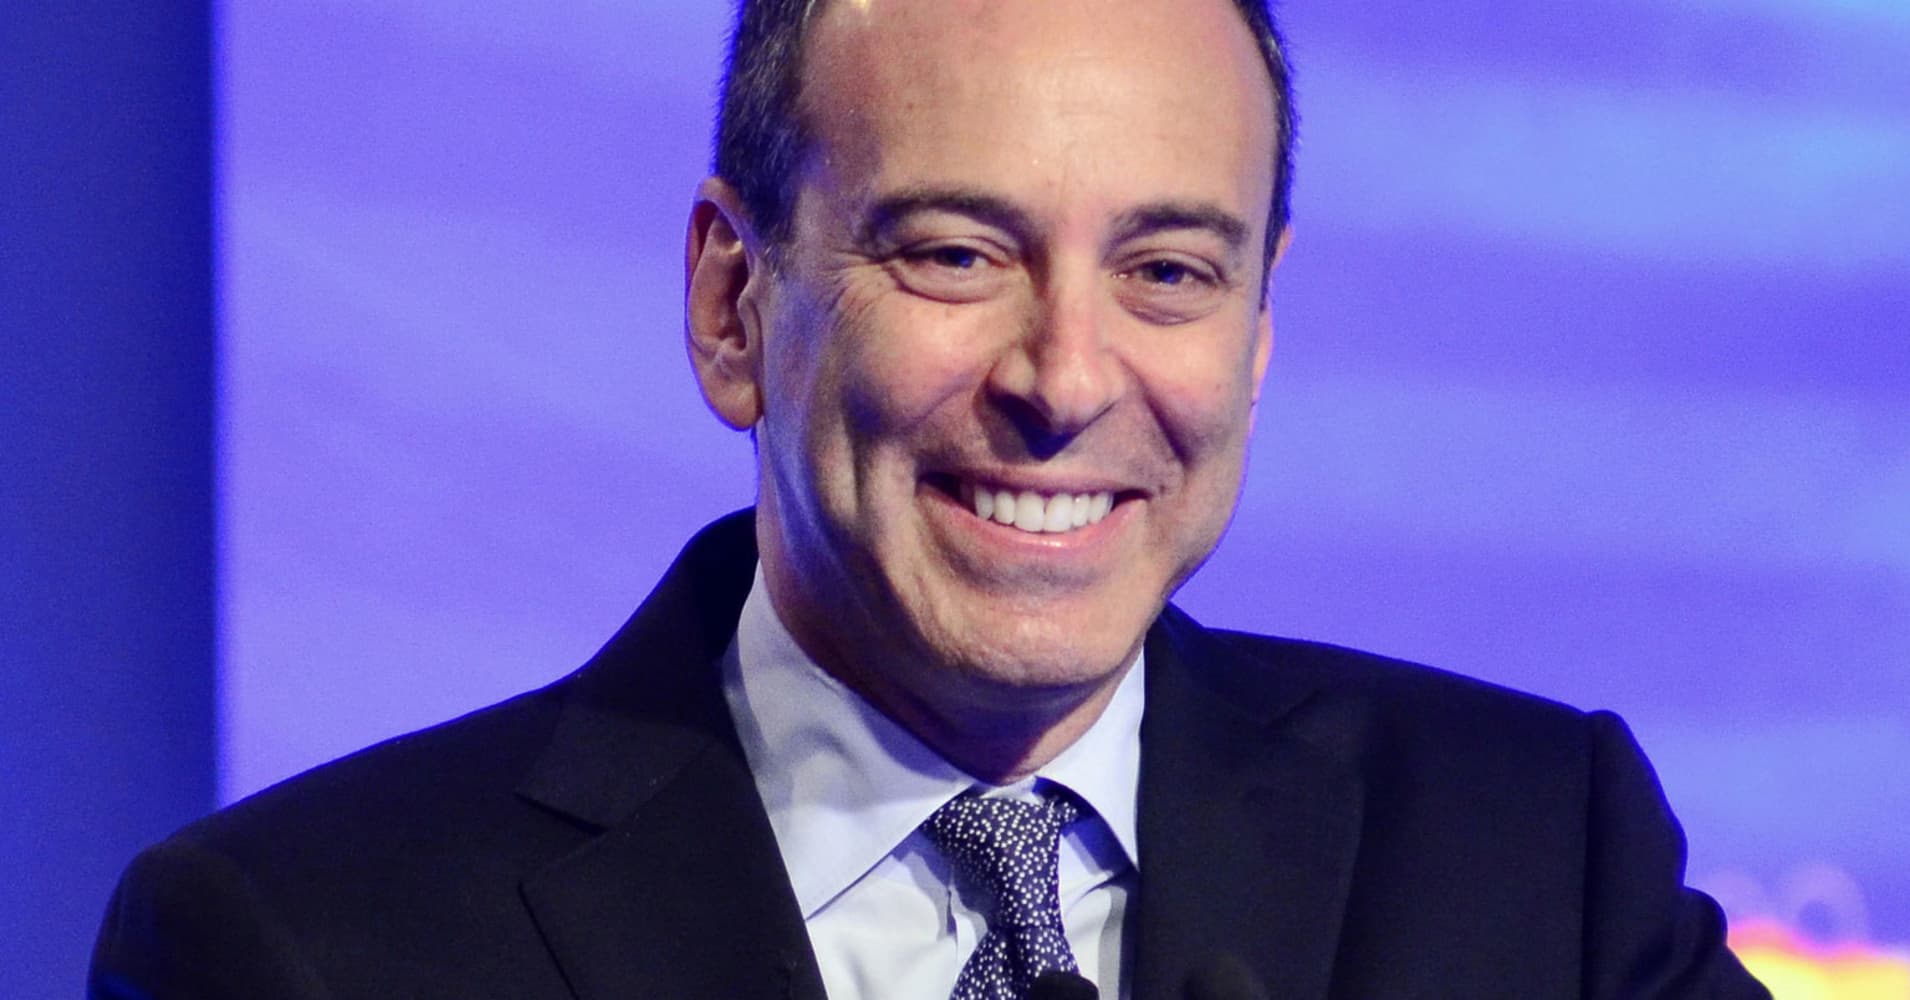 Sears CEO receives 'numerous inquiries from potential partners' for asset sale